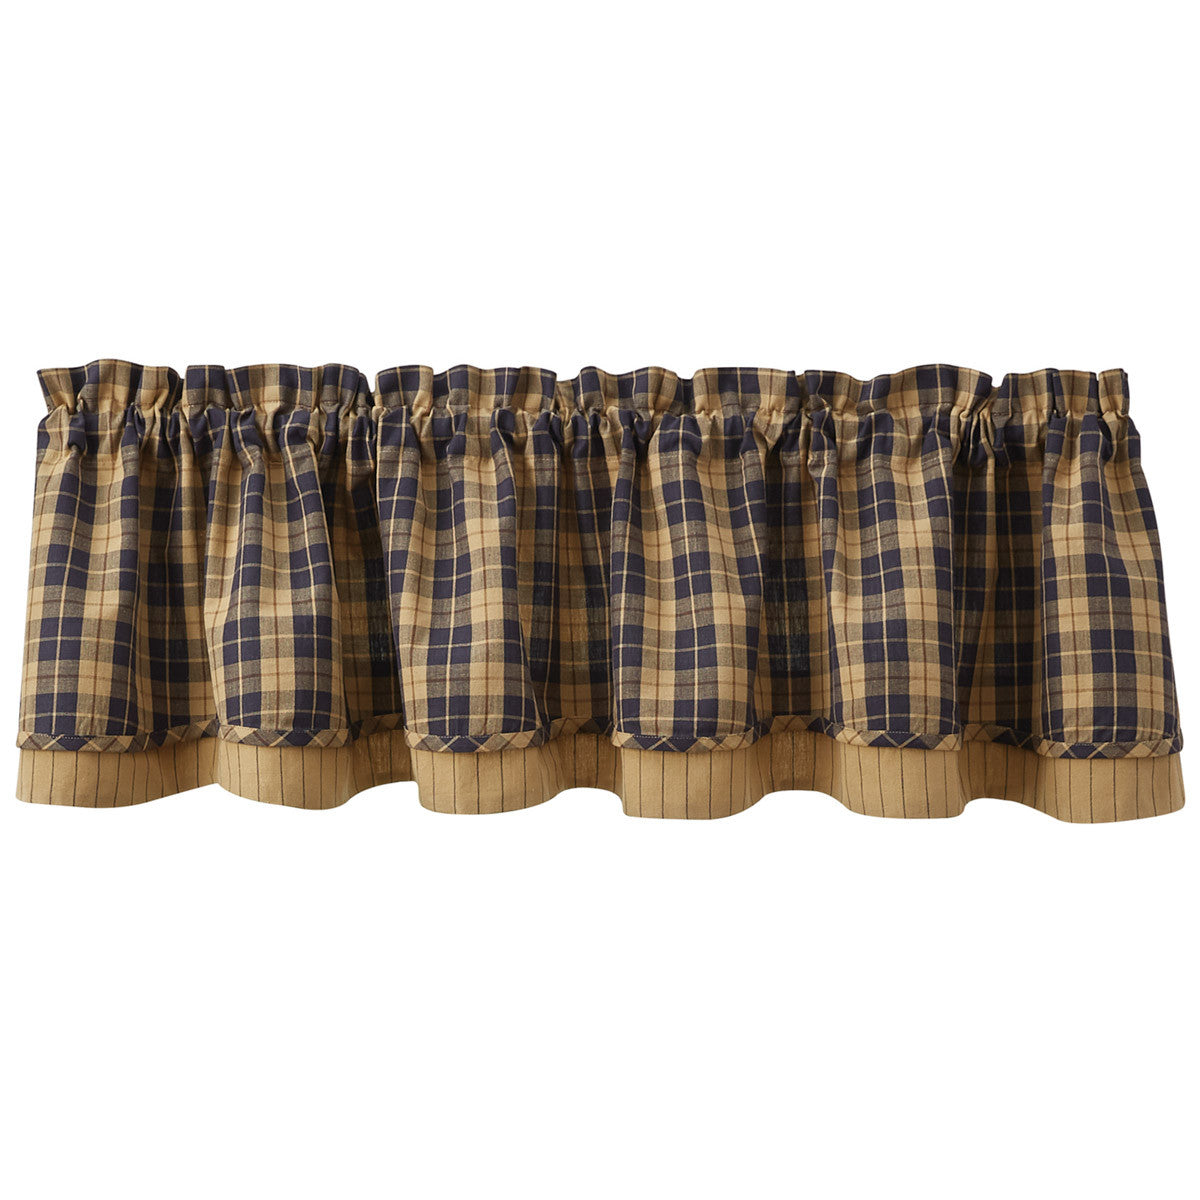 Pittsfield Valance Set of 4 - Lined Layered Park Designs